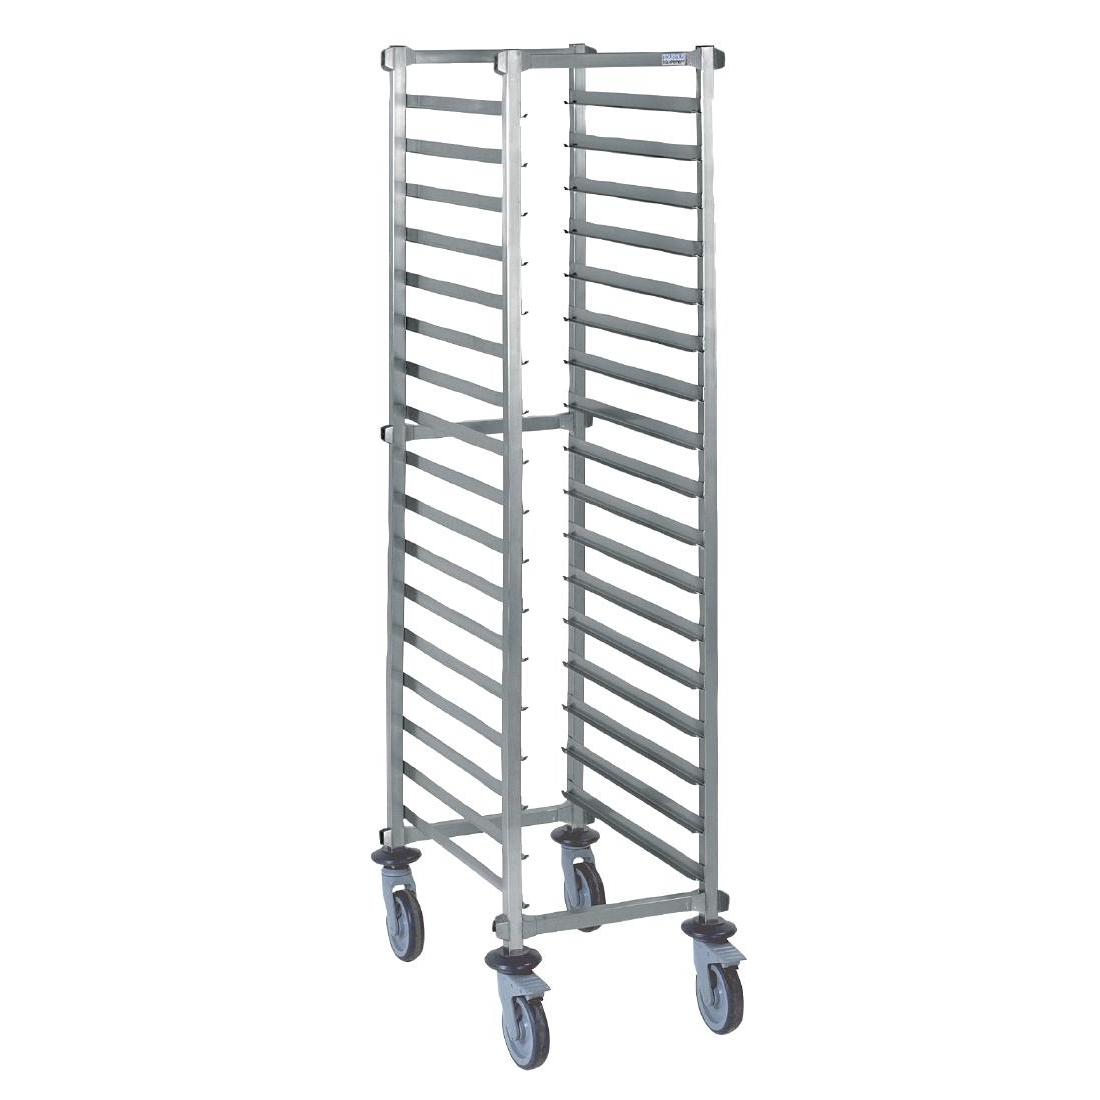 Tournus Self Assembly GN1/1 Racking Trolley 20 Levels